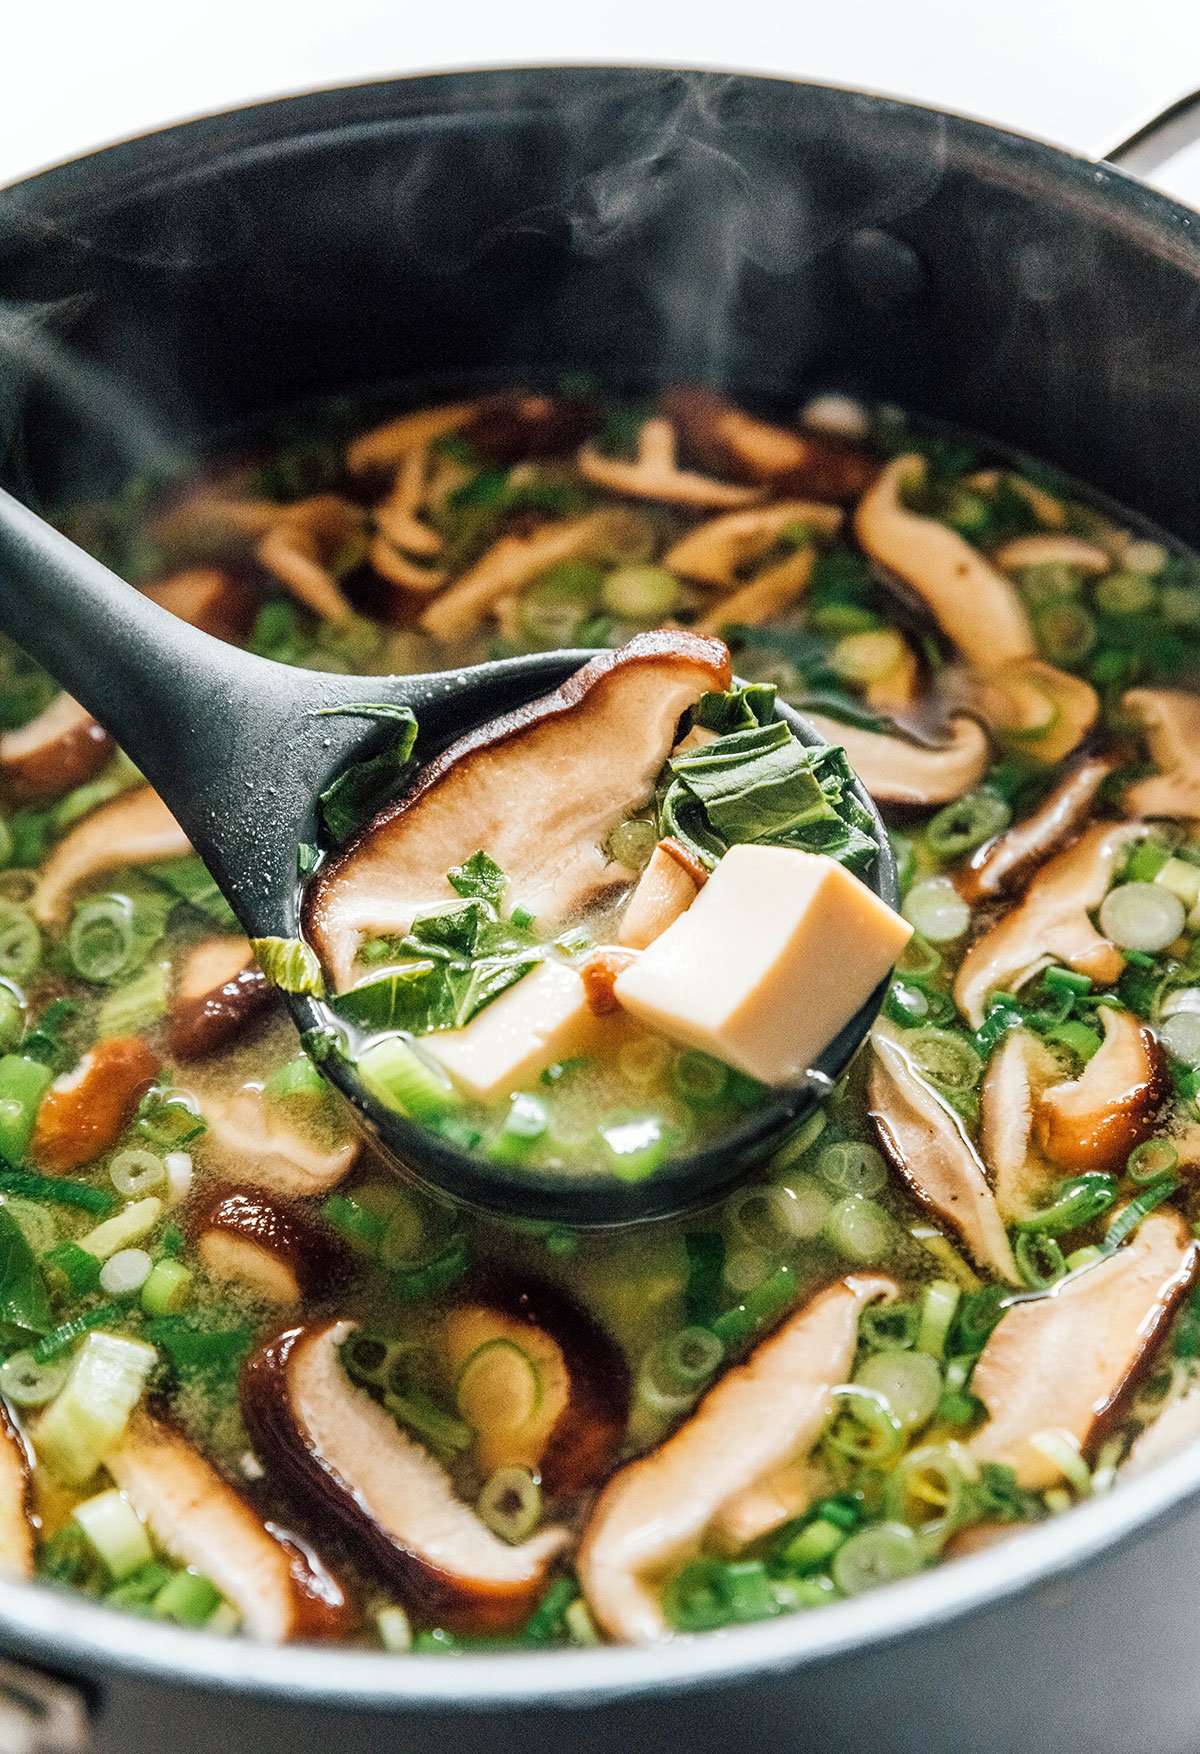 A ladle scooping out vegan miso soup with bits of bok choy, mushrooms, tofu, and green onions.